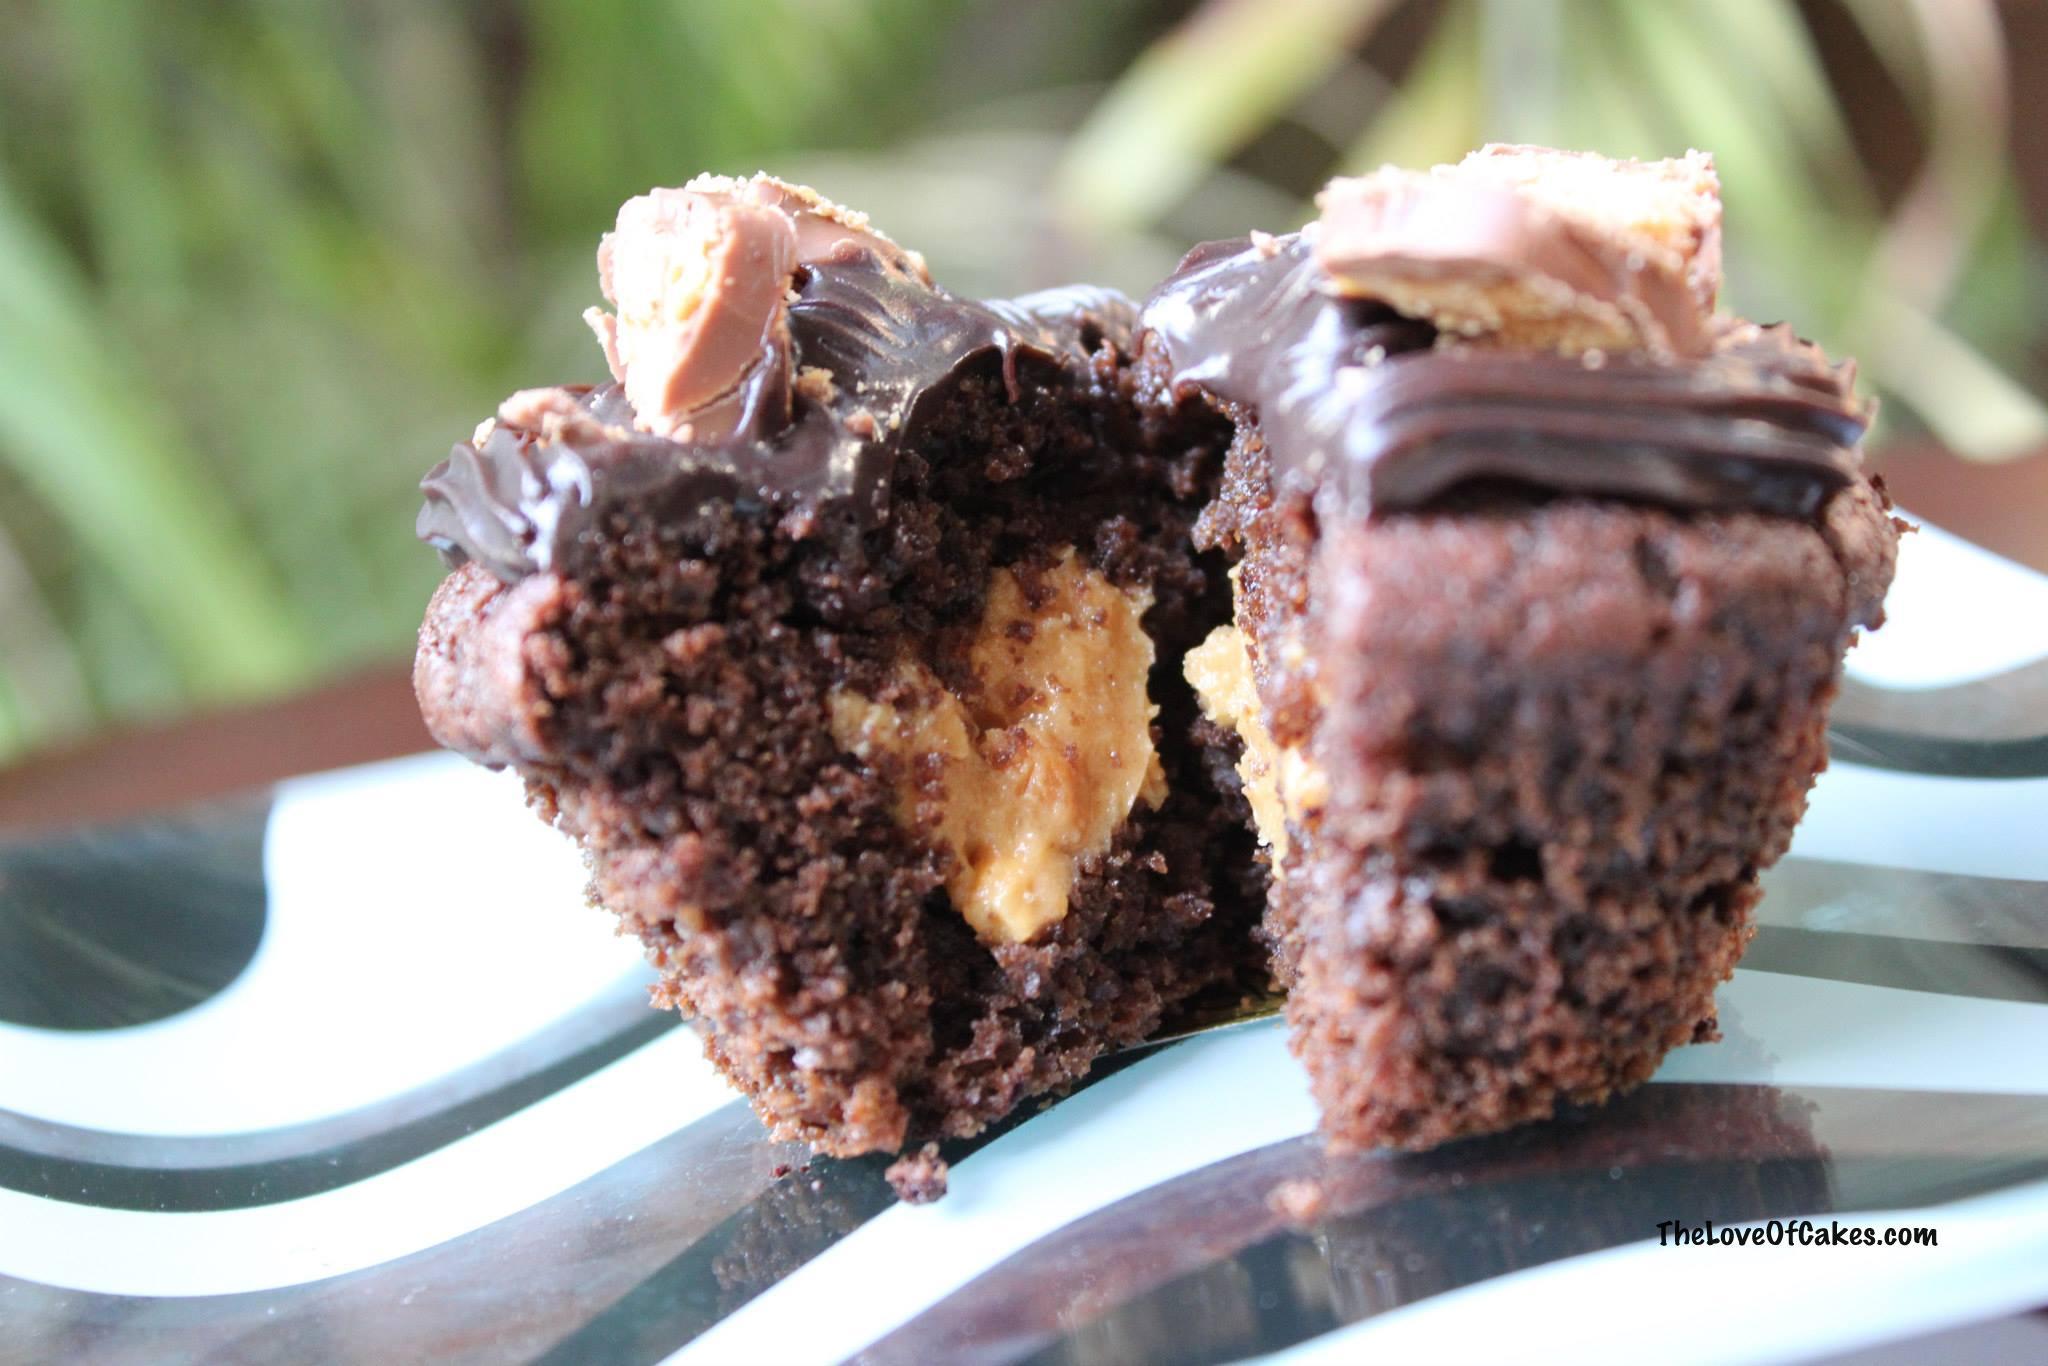 Chocolate cupcakes with peanut butter centers and chocolate icing